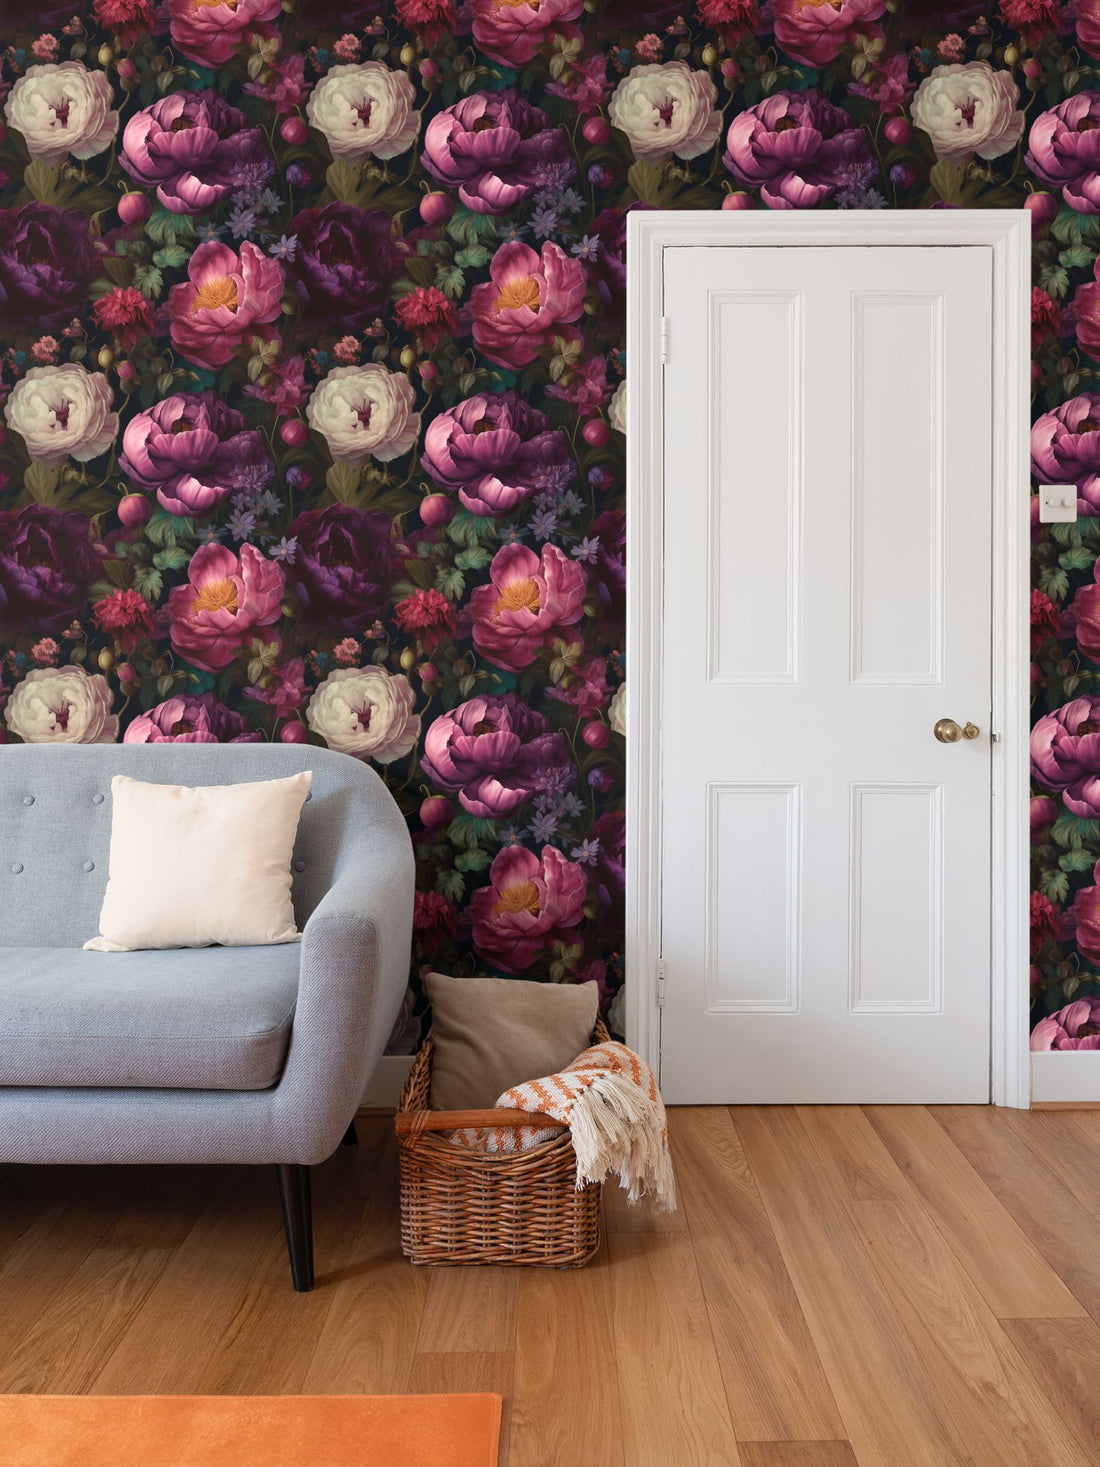 Vintage Meets Modern: Mixing Traditional and Contemporary Styles with Unconventional Wallpaper Designs